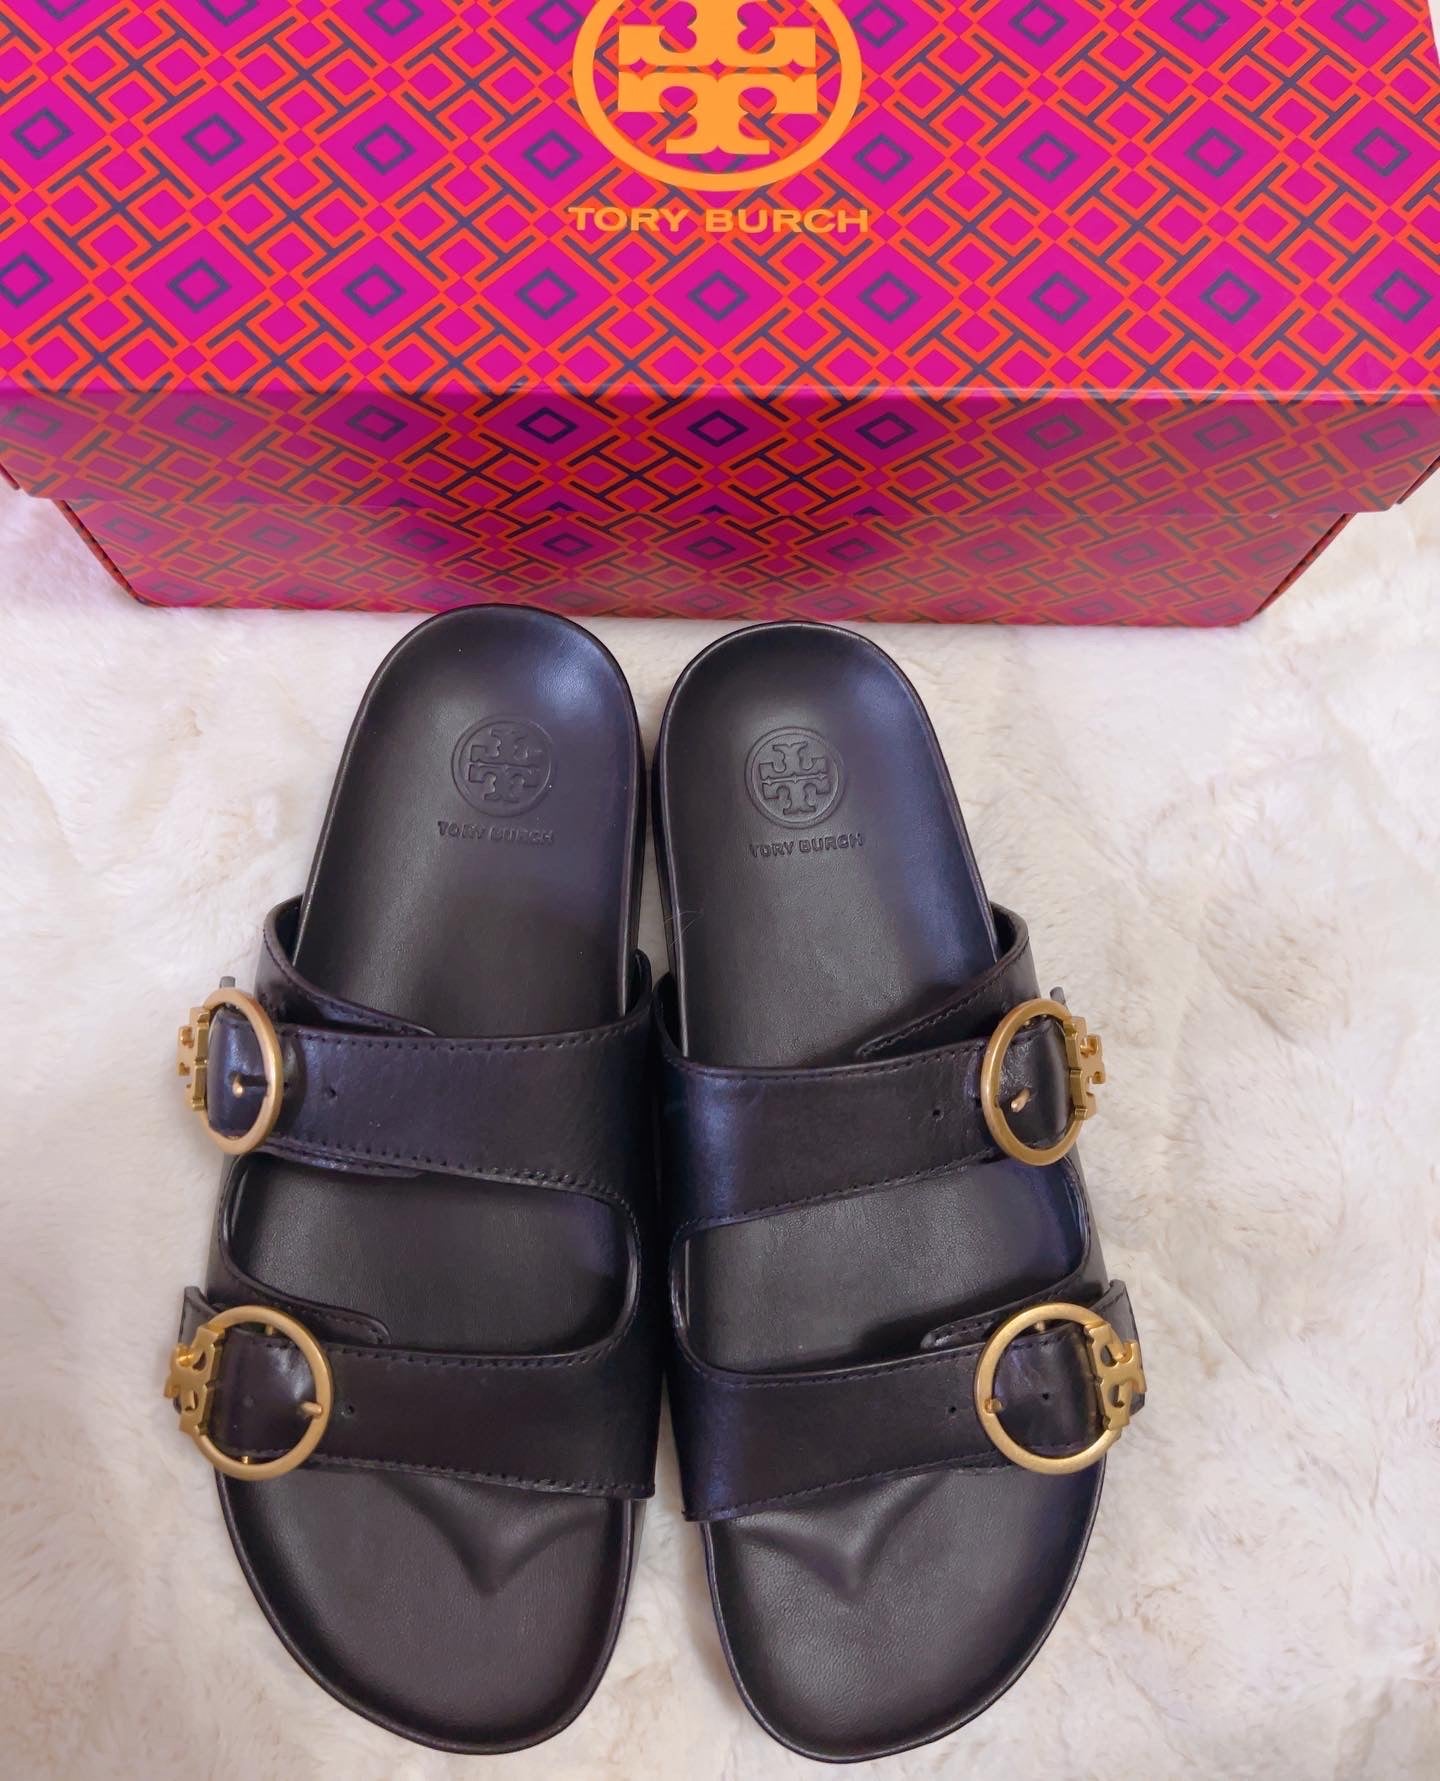 Tory Burch Anatomic Slide Calf Leather Sandals, Perfect Black, Size 7 & 7.5